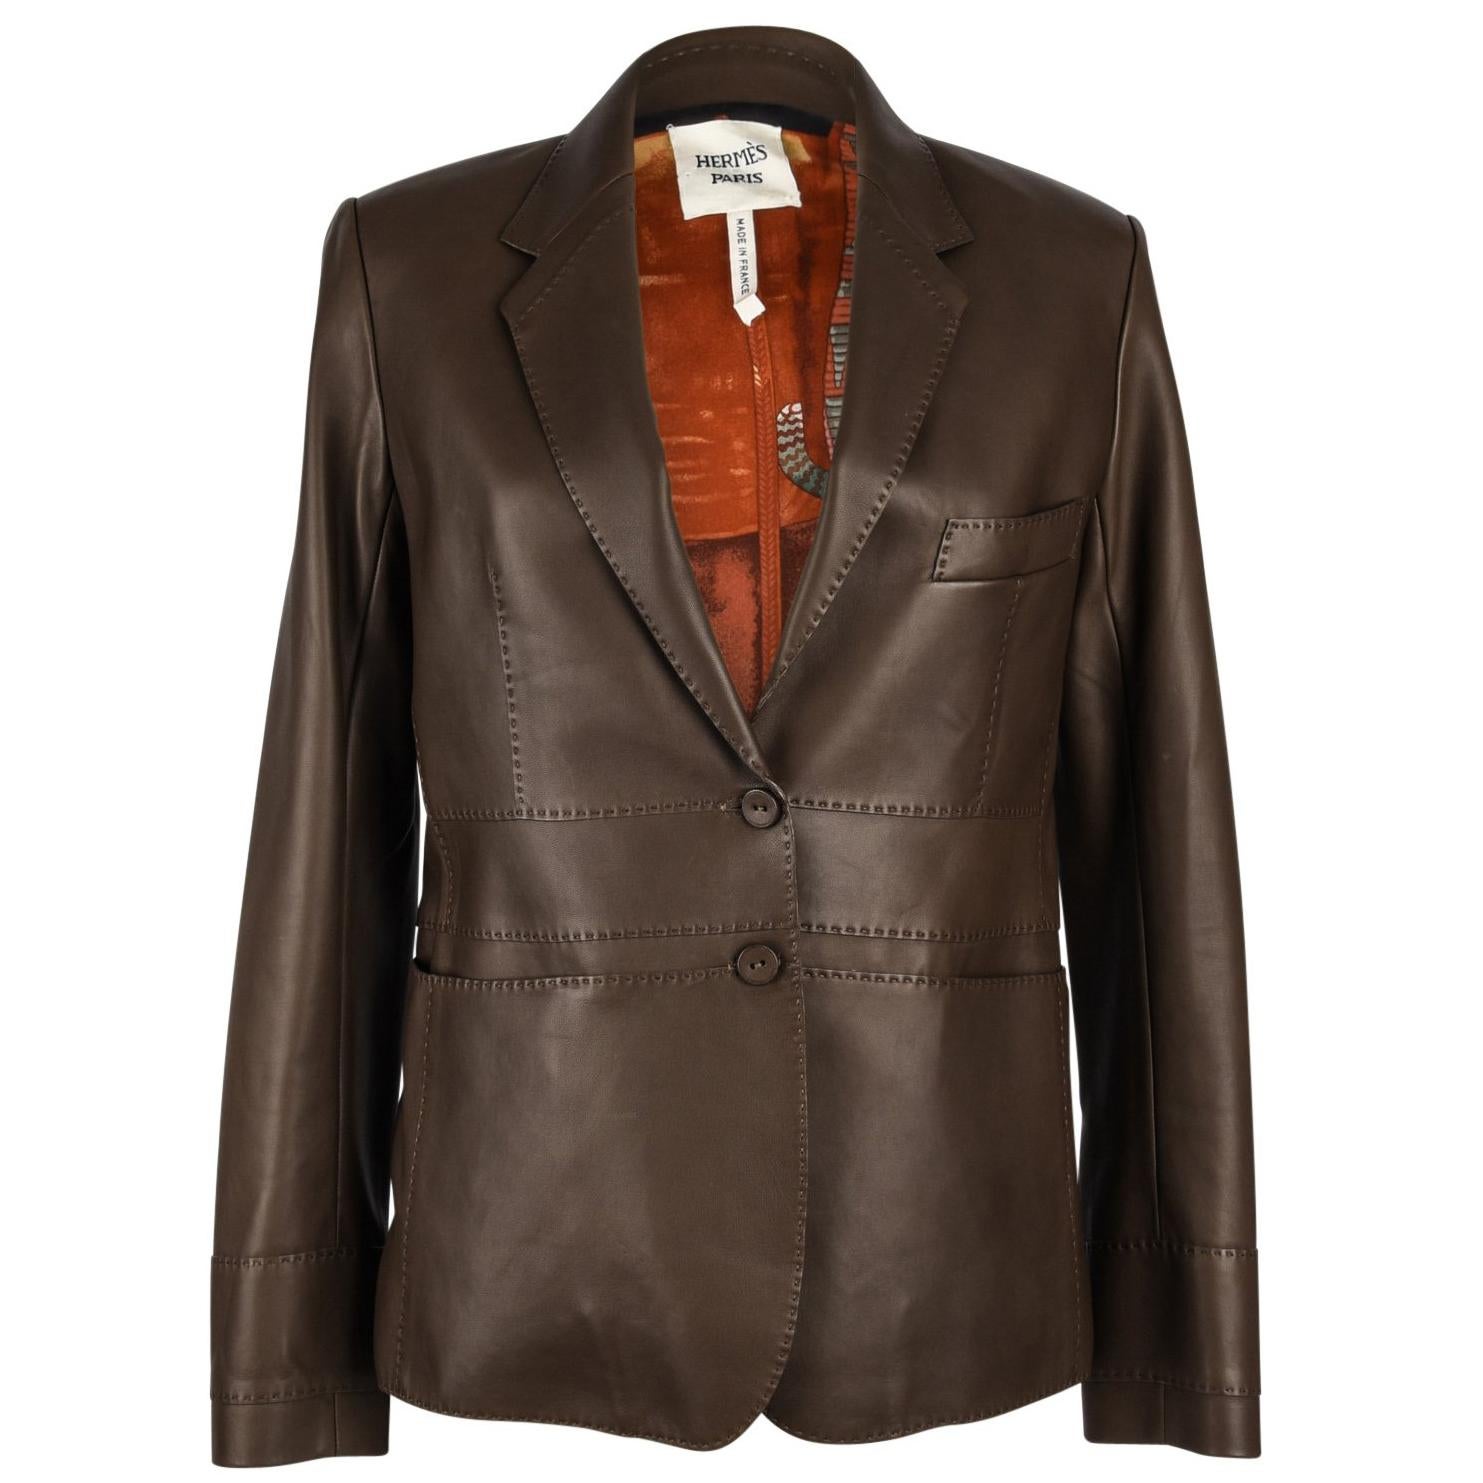 Guaranteed authentic Hermes single breast brown lambskin leather jacket. 
Exquisitely tailored in the softest lambskin accented with top stitch detail throughout and 2 covered buttons.
Jacket has 1 breast pocket and 2 slot pockets.
Lined in a